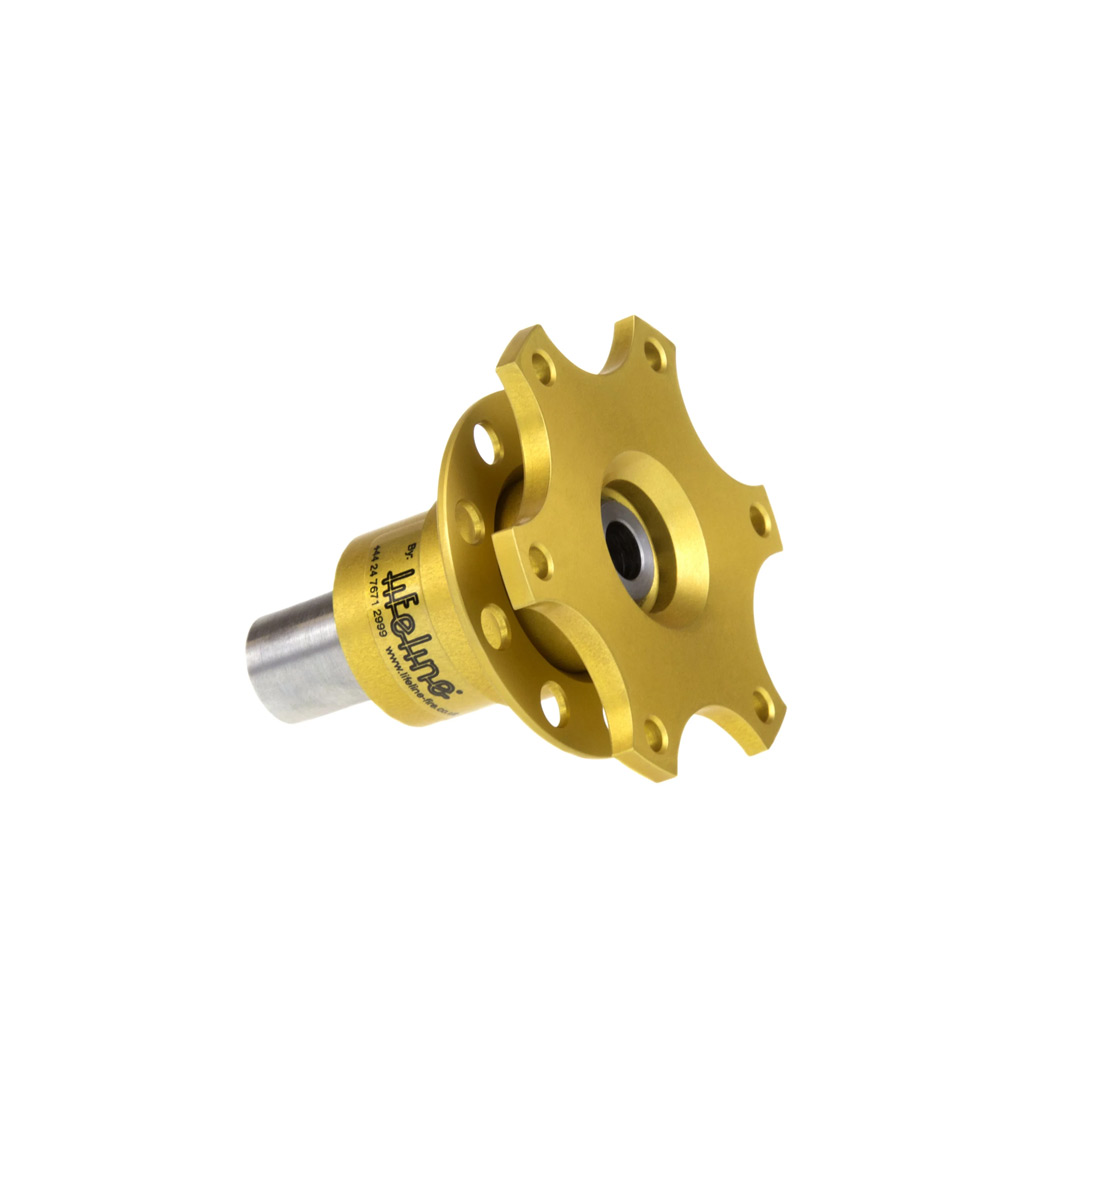 Lifeline Quick Release Steering Hub - Touring/Rally Car